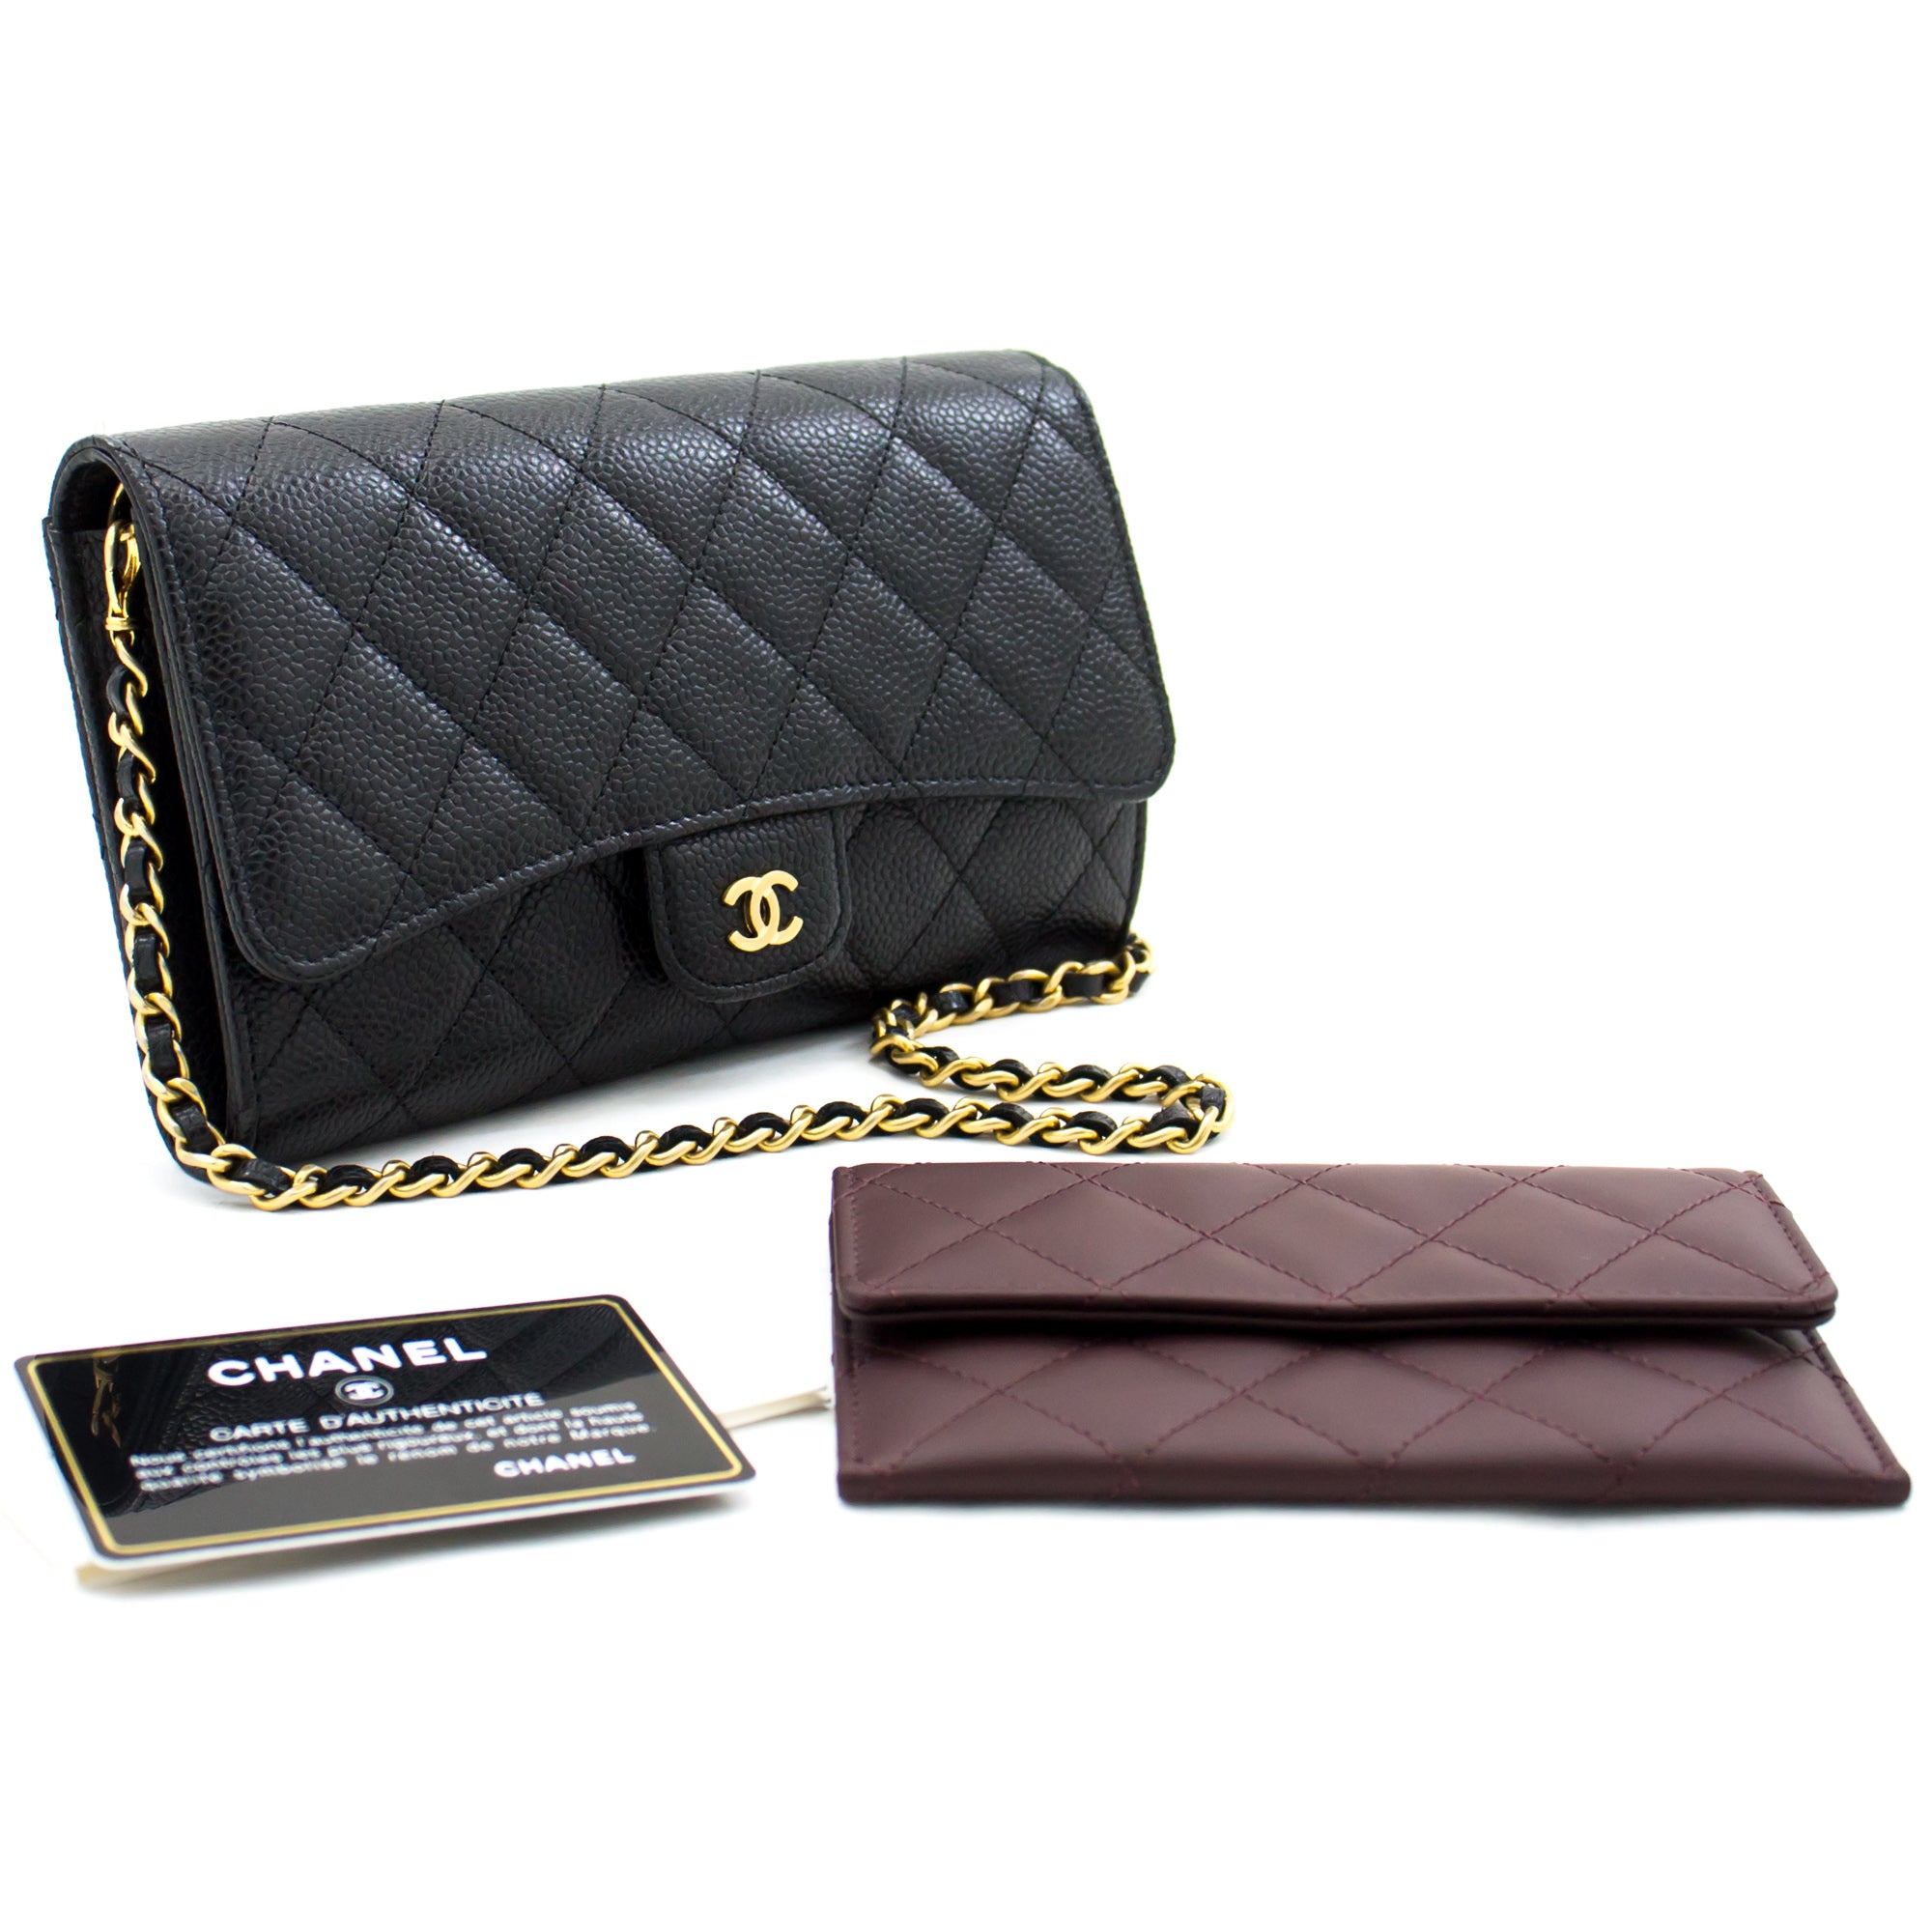 SHOP - CHANEL - Page 14 - VLuxeStyle